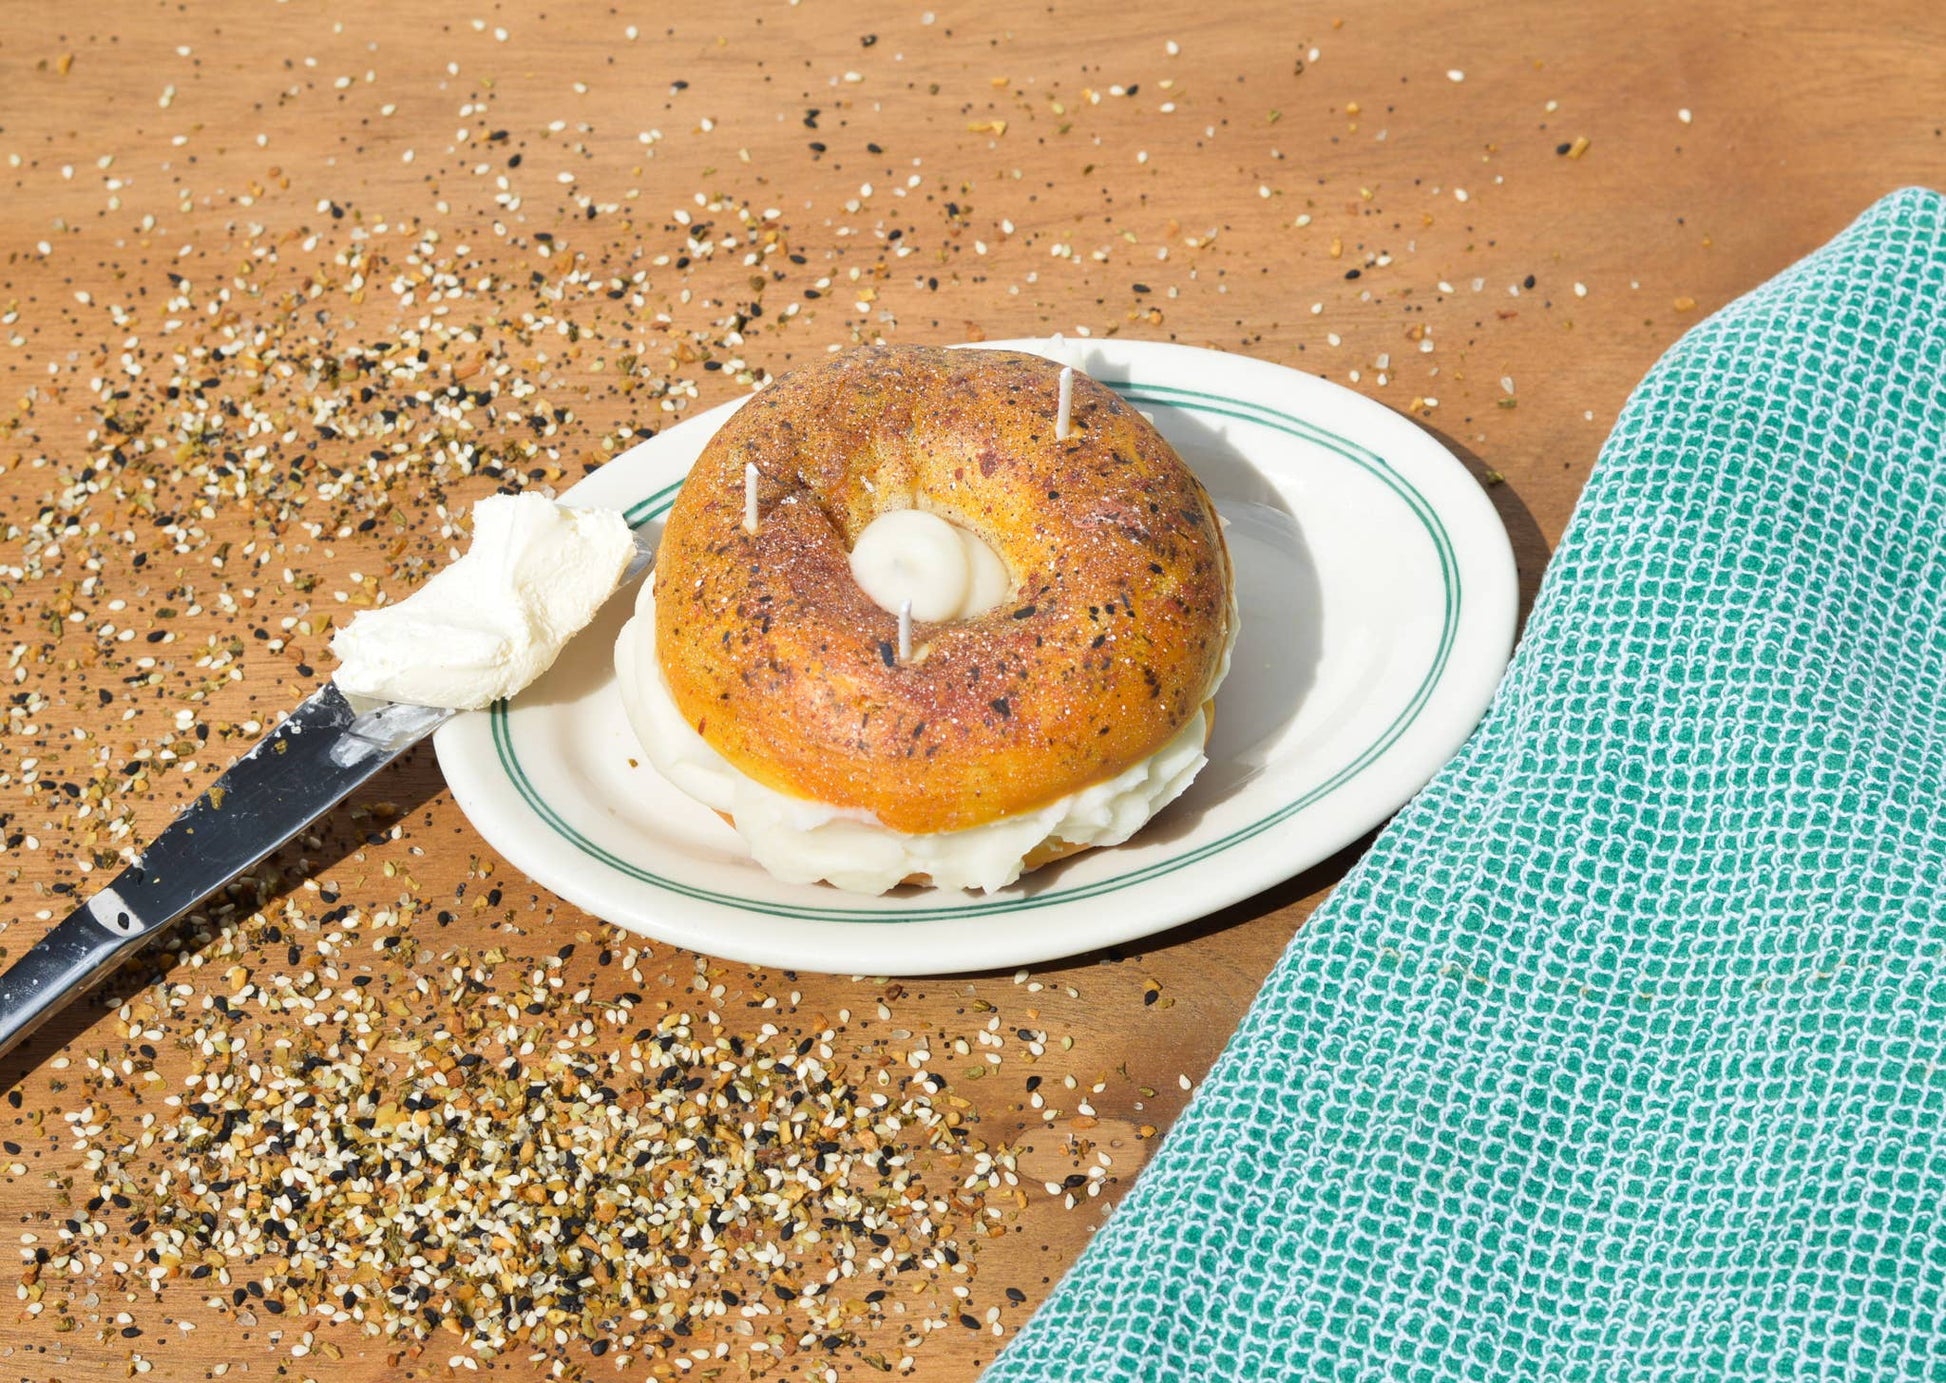 Everything bagel candle shown on a plate with a knife full of cream cheese.